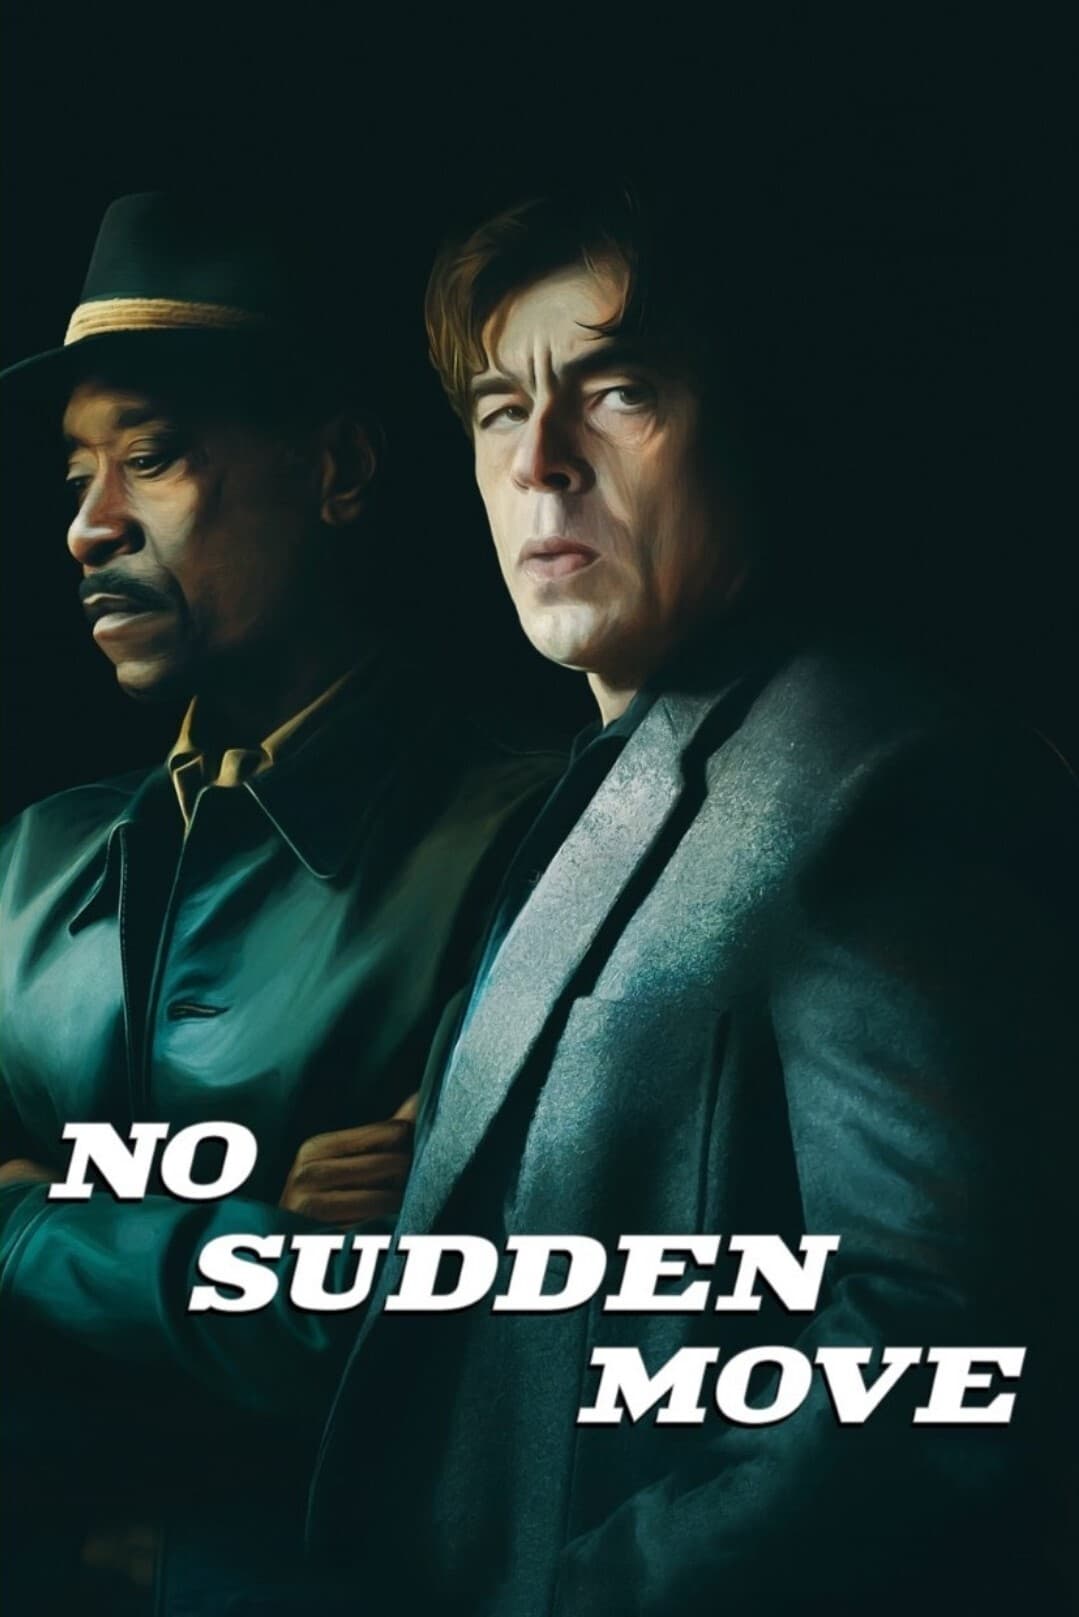 No Sudden Move - CINEMABLEND